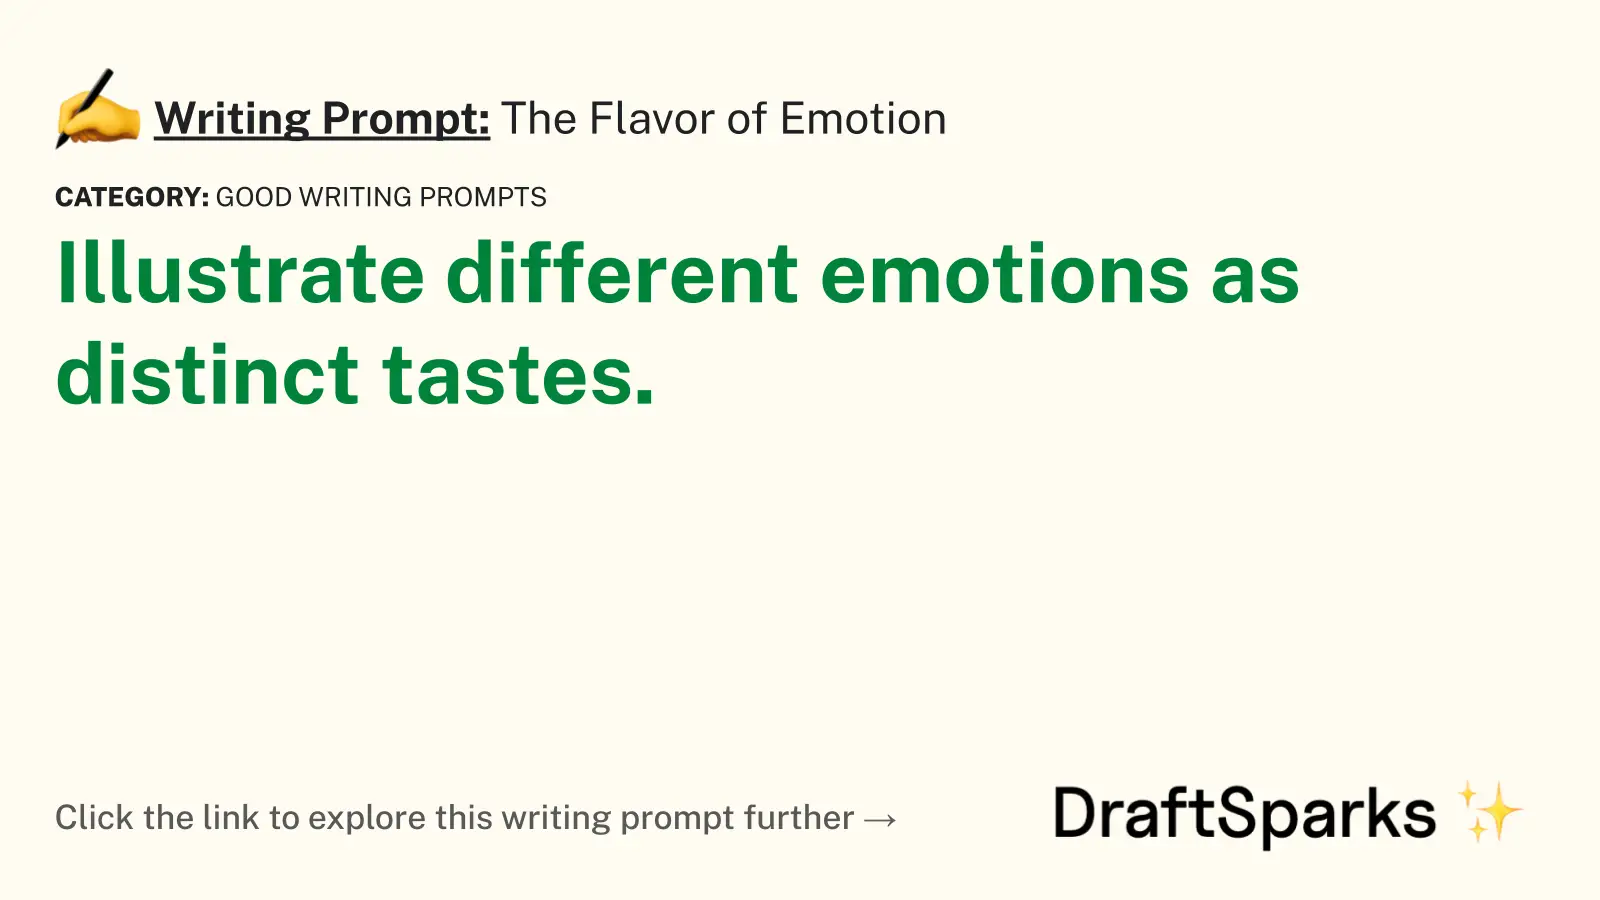 The Flavor of Emotion